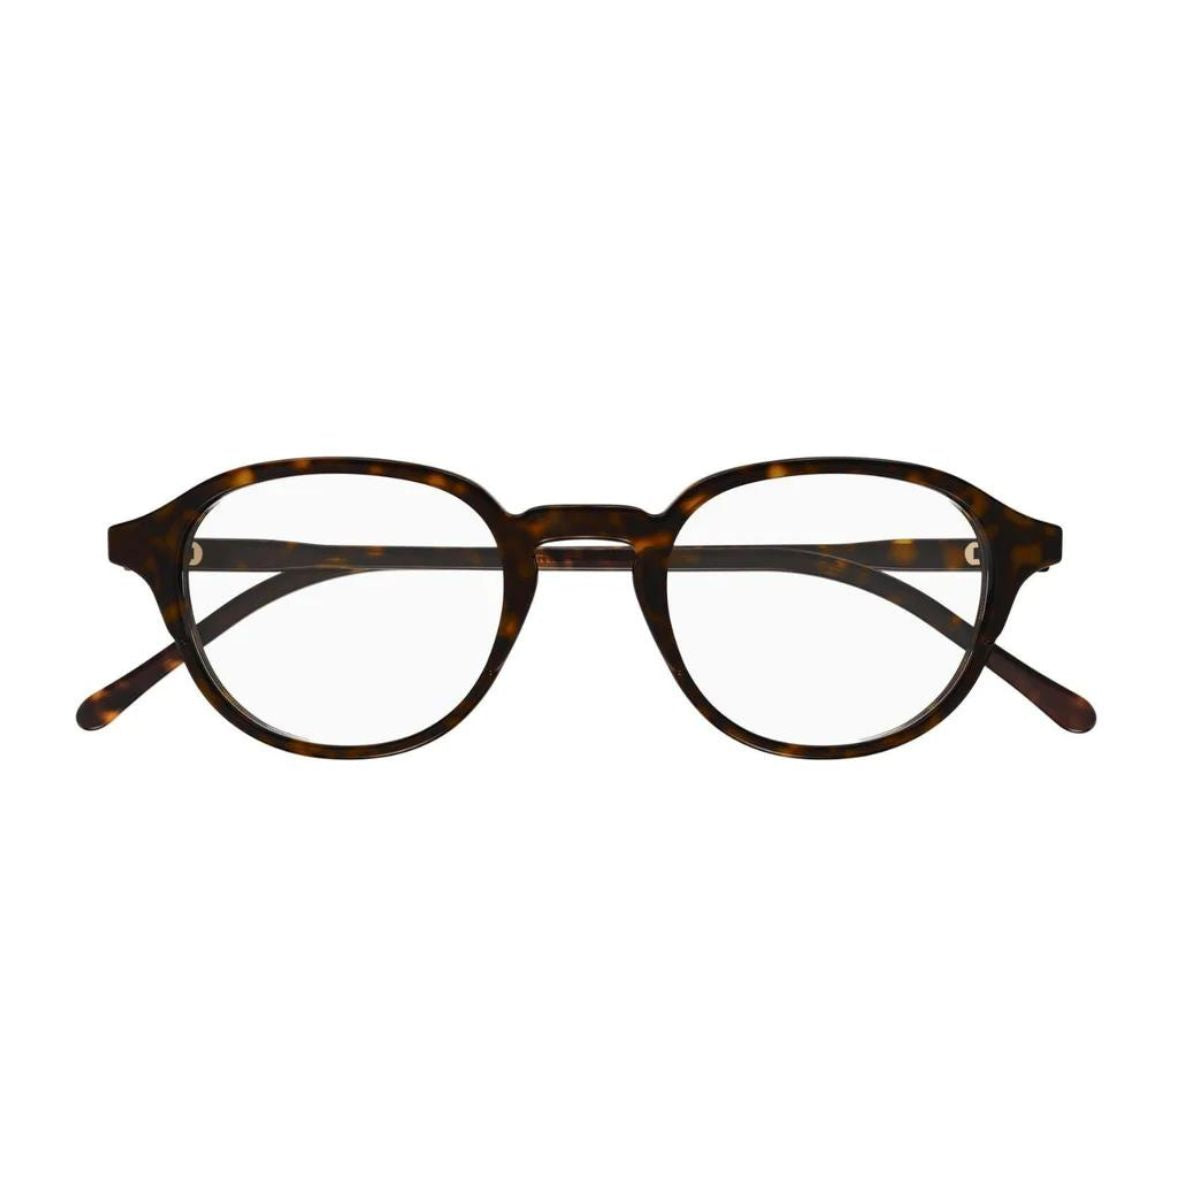 "Gucci 1212O 005 oval shape specs frame for men and women online at optorium"